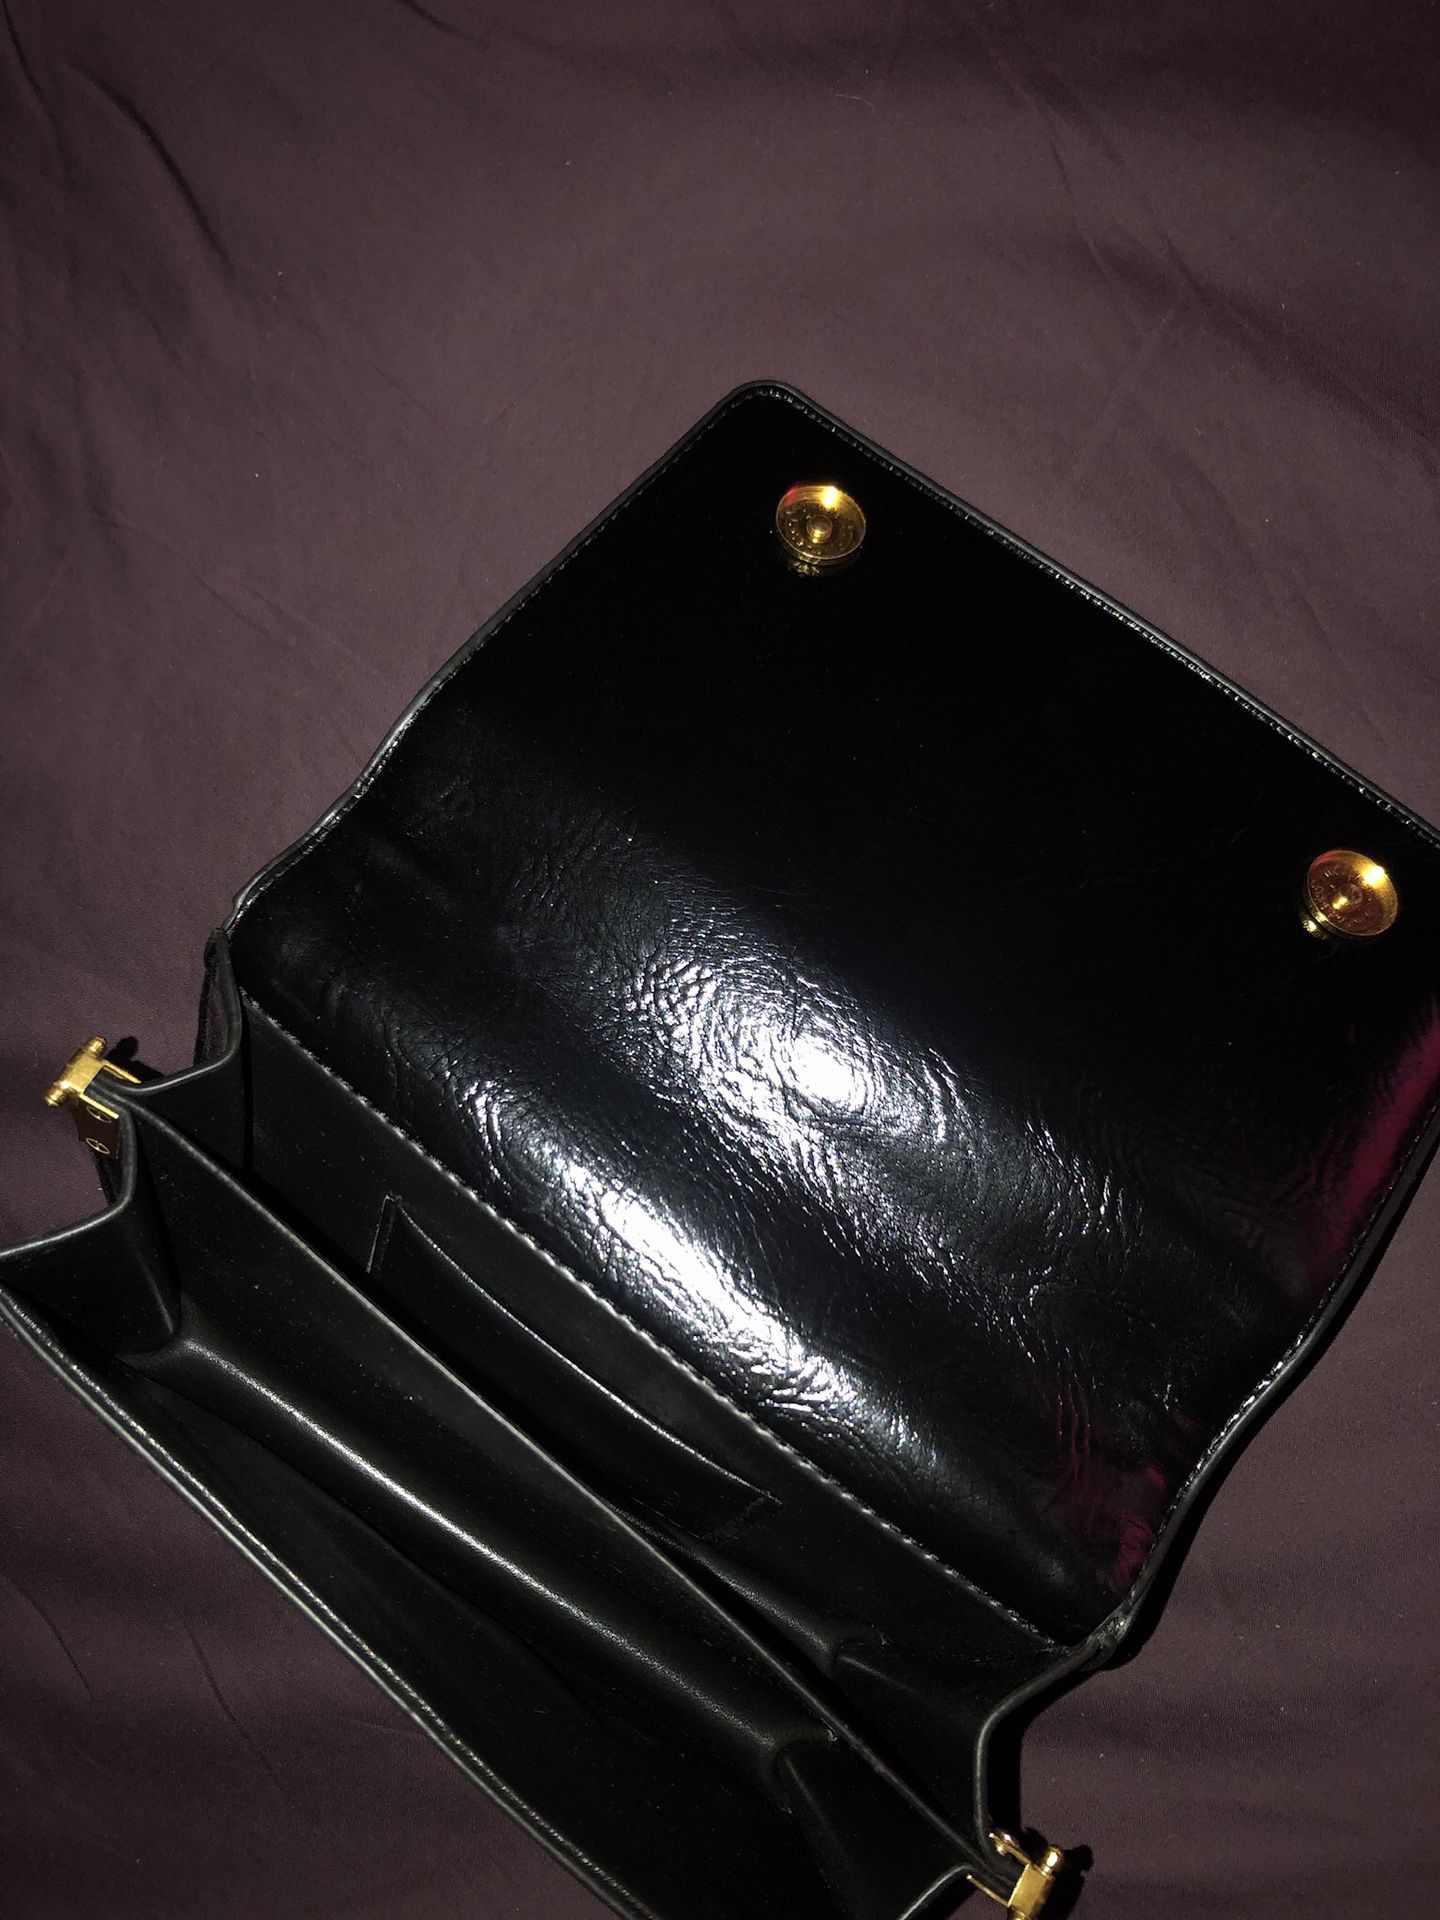 Clare Vivier Foldover Clutch - Never Used! for Sale in Burbank, CA - OfferUp